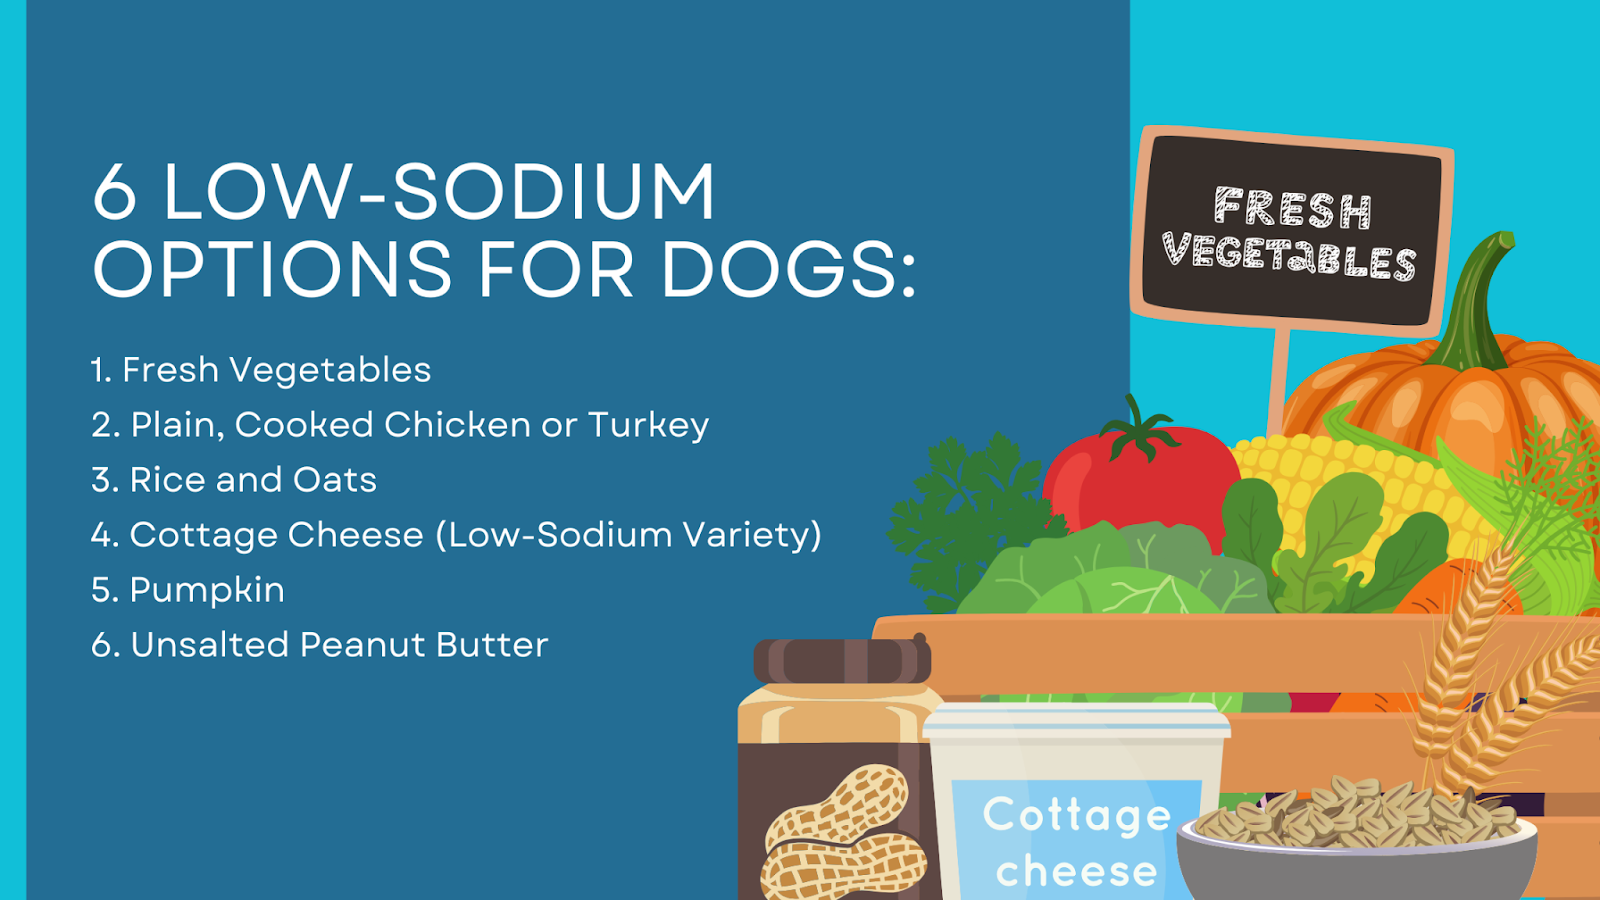 6 low-sodium options for dogs